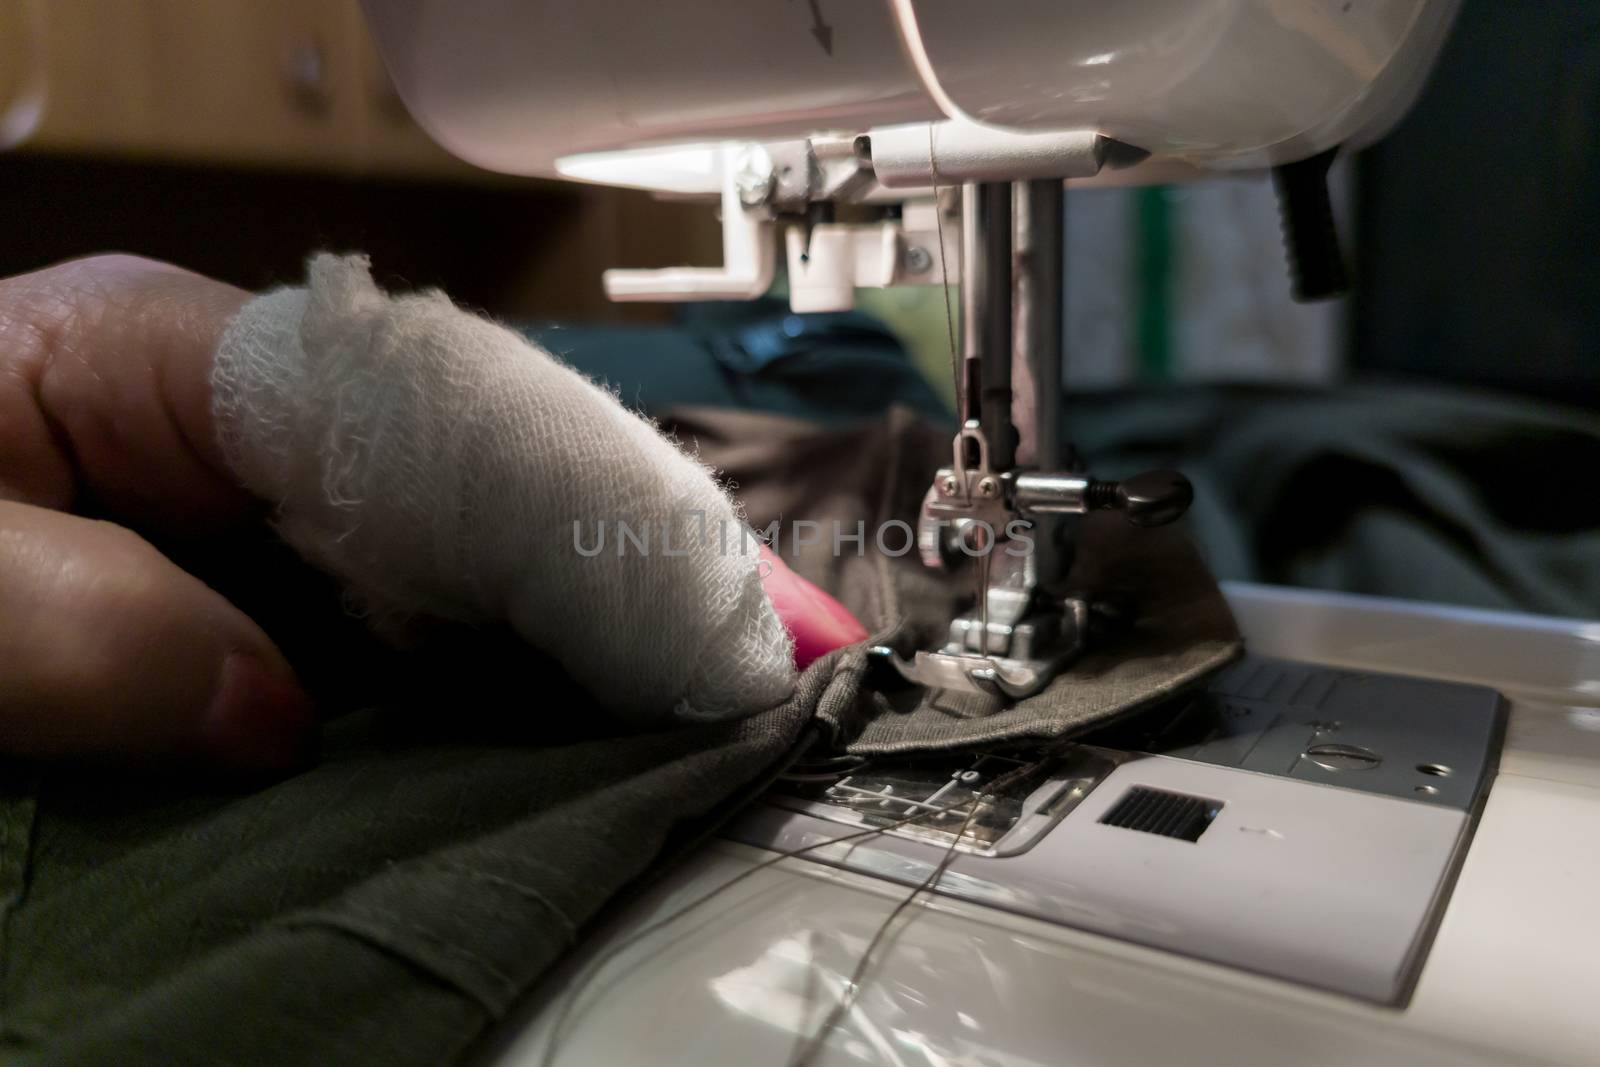 a hand of aged womans with a bandaged finger sews with a sewing machine - close-up with selective focus